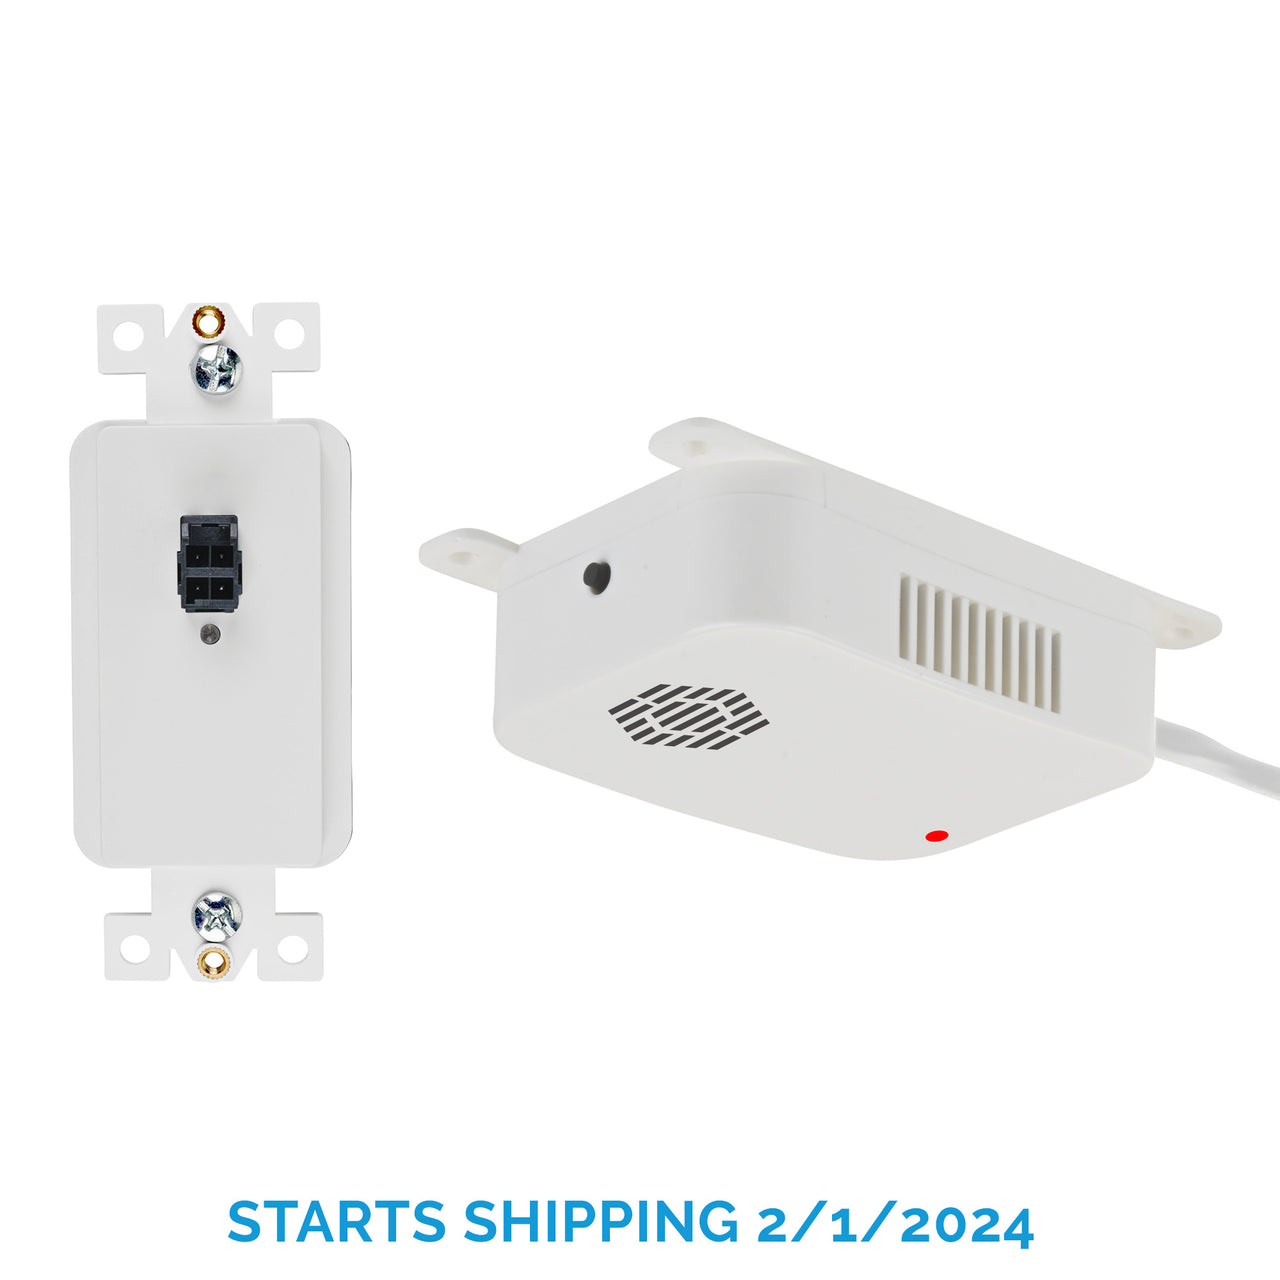 Fire Guard Disconnect with Smoke and Heat Sensor - starts shipping 2/1/2024